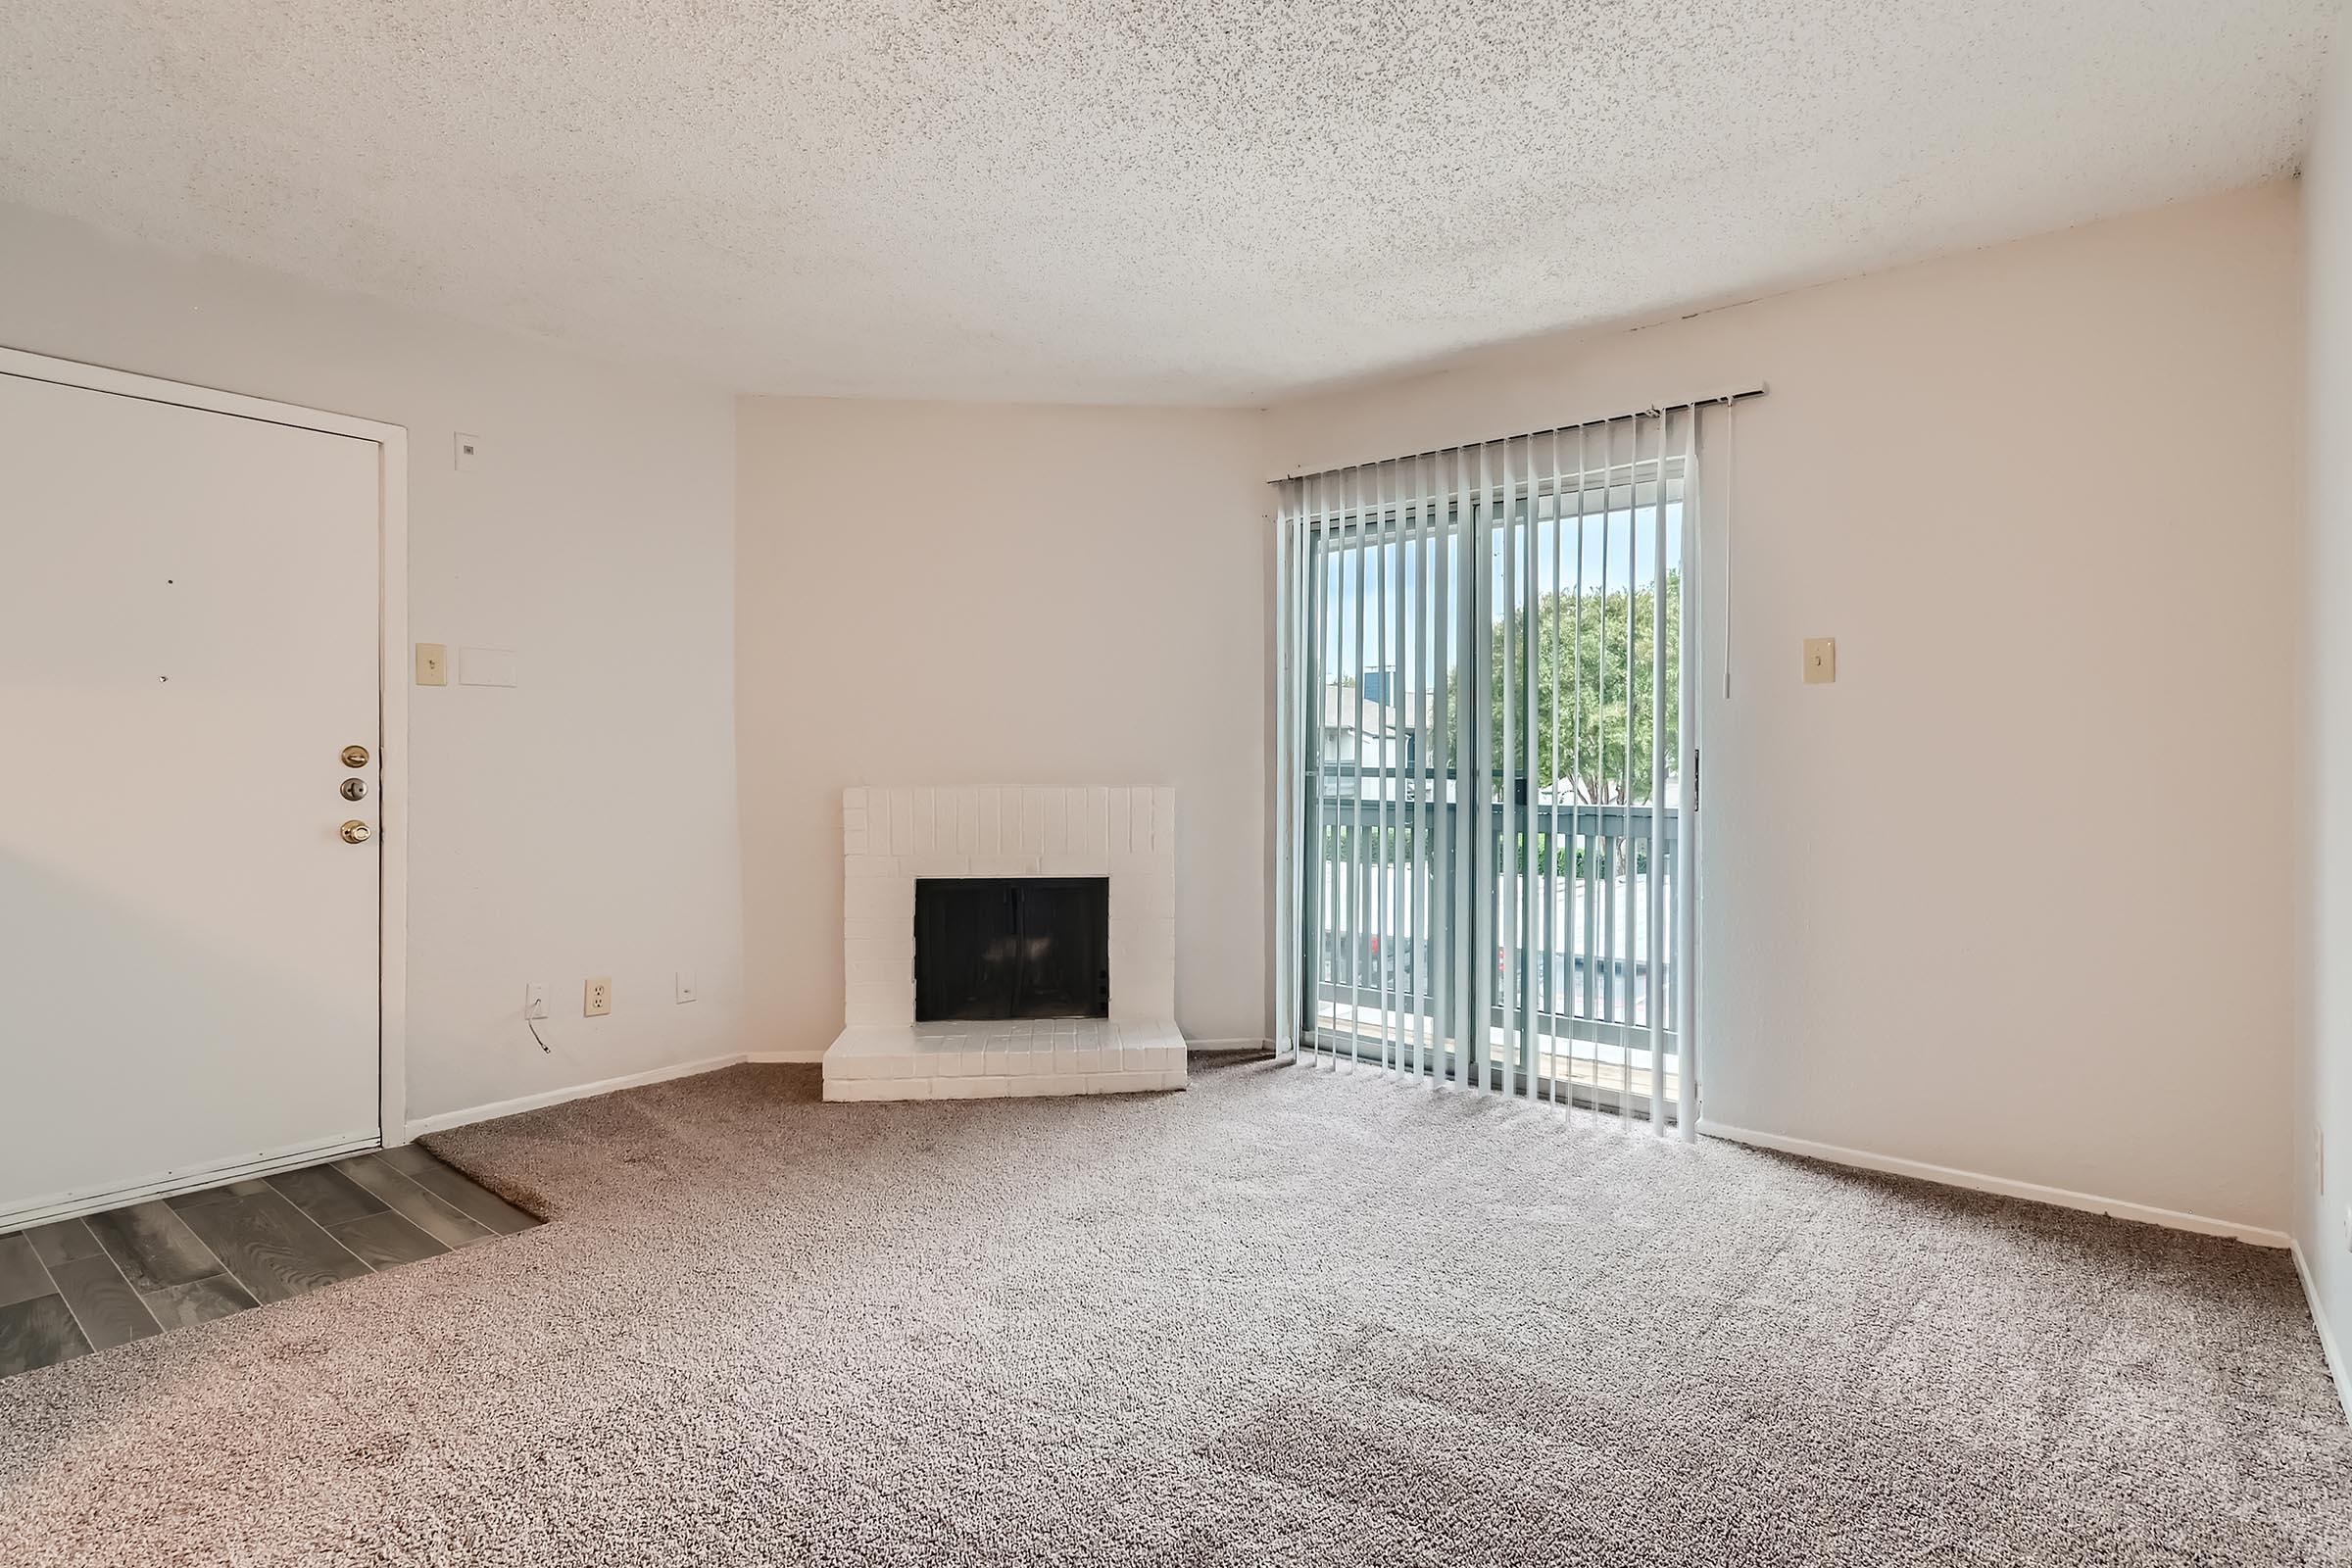 A carpeted living room with a fireplace and a balcony at Rise North Arlington in Arlington, TX.